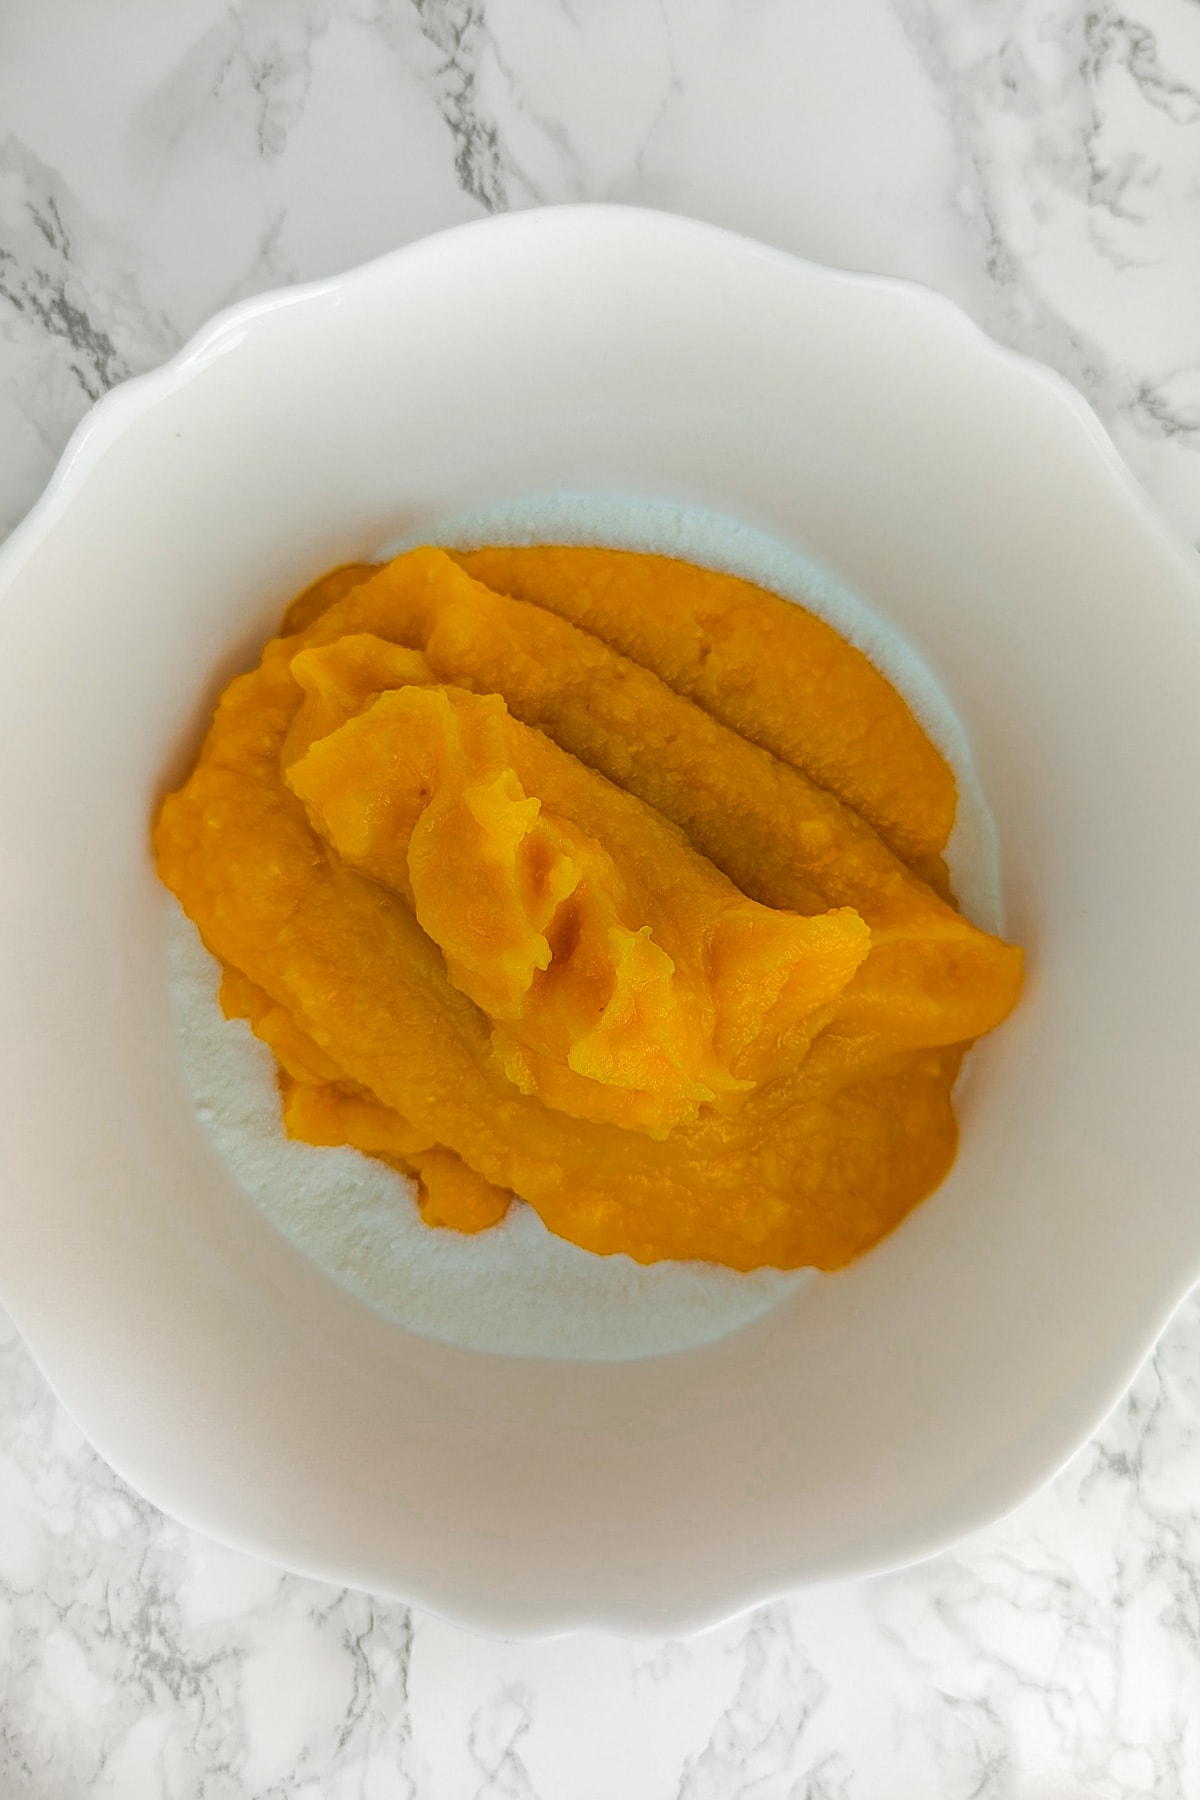 Top view of a plate with sugar, starch and pumpkin puree.